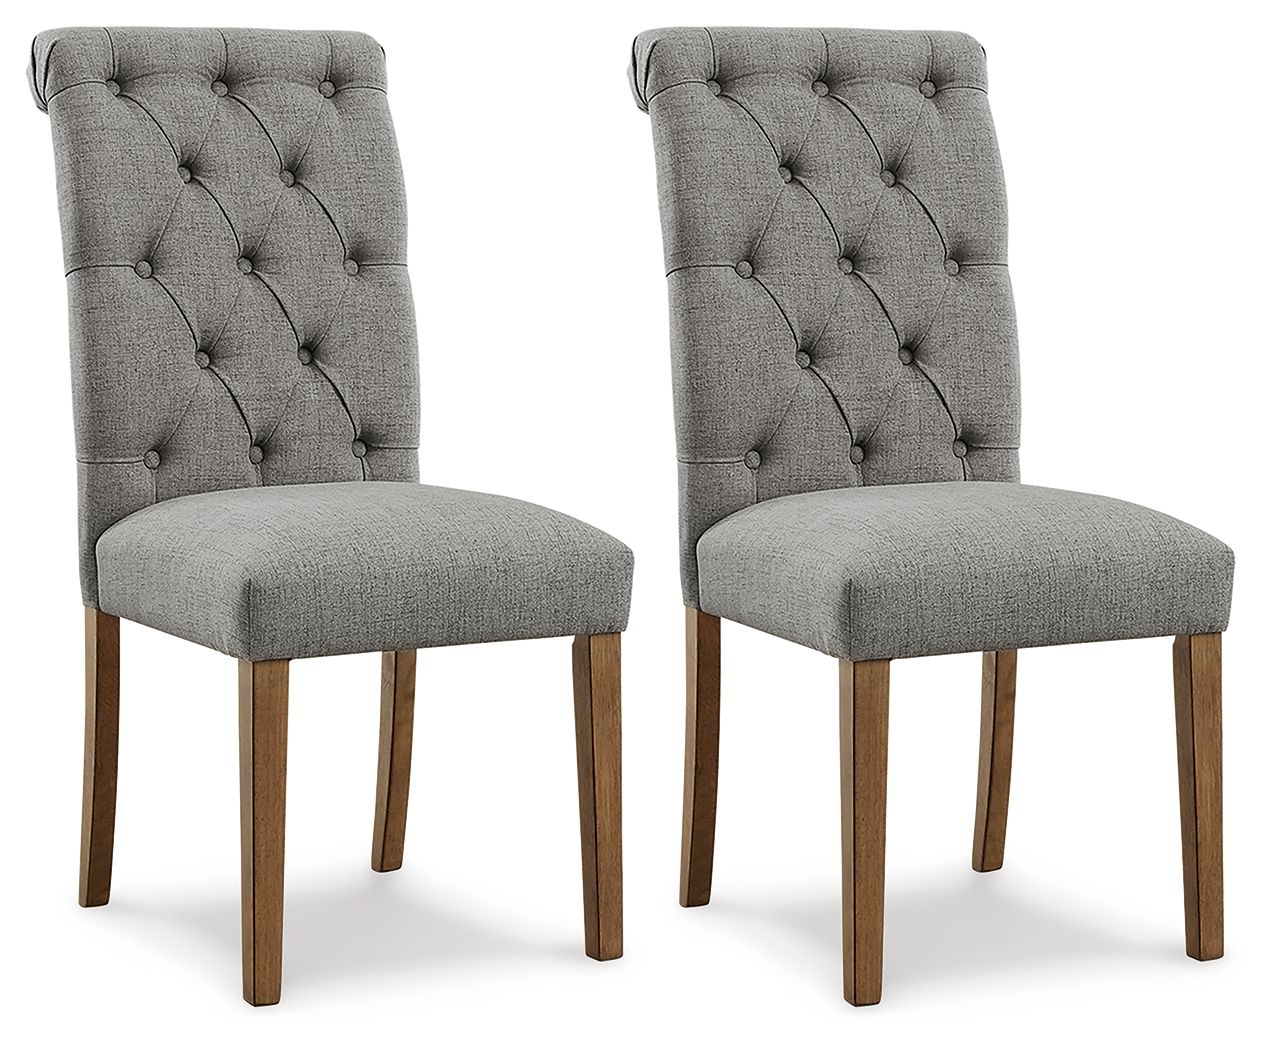 Harvina - Gray - Dining Uph Side Chair (Set of 2) - 5th Avenue Furniture